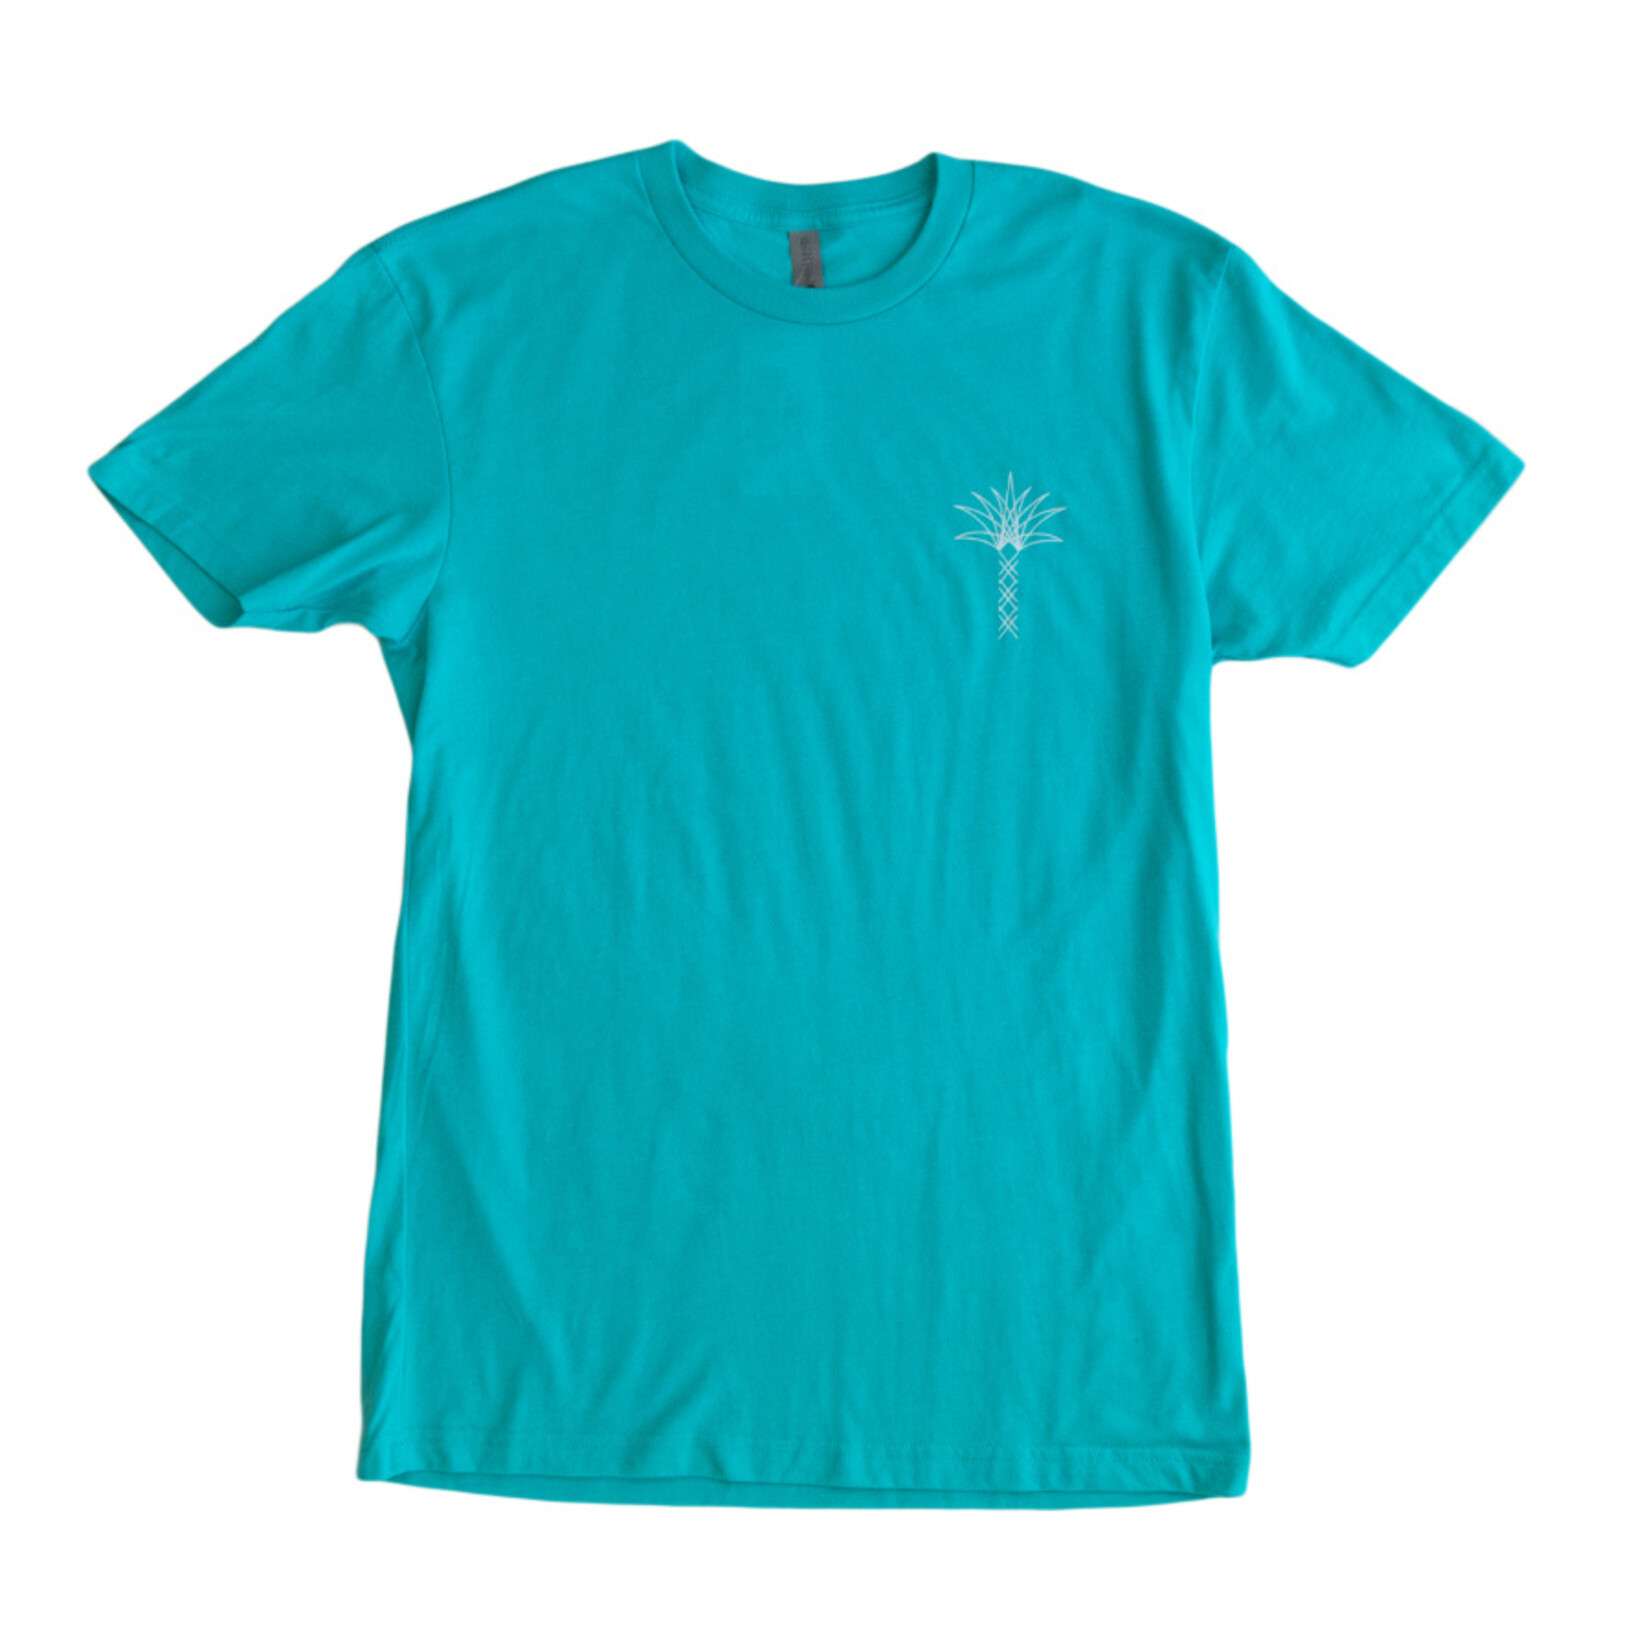 The Salty Palm The Salty Palm Tee